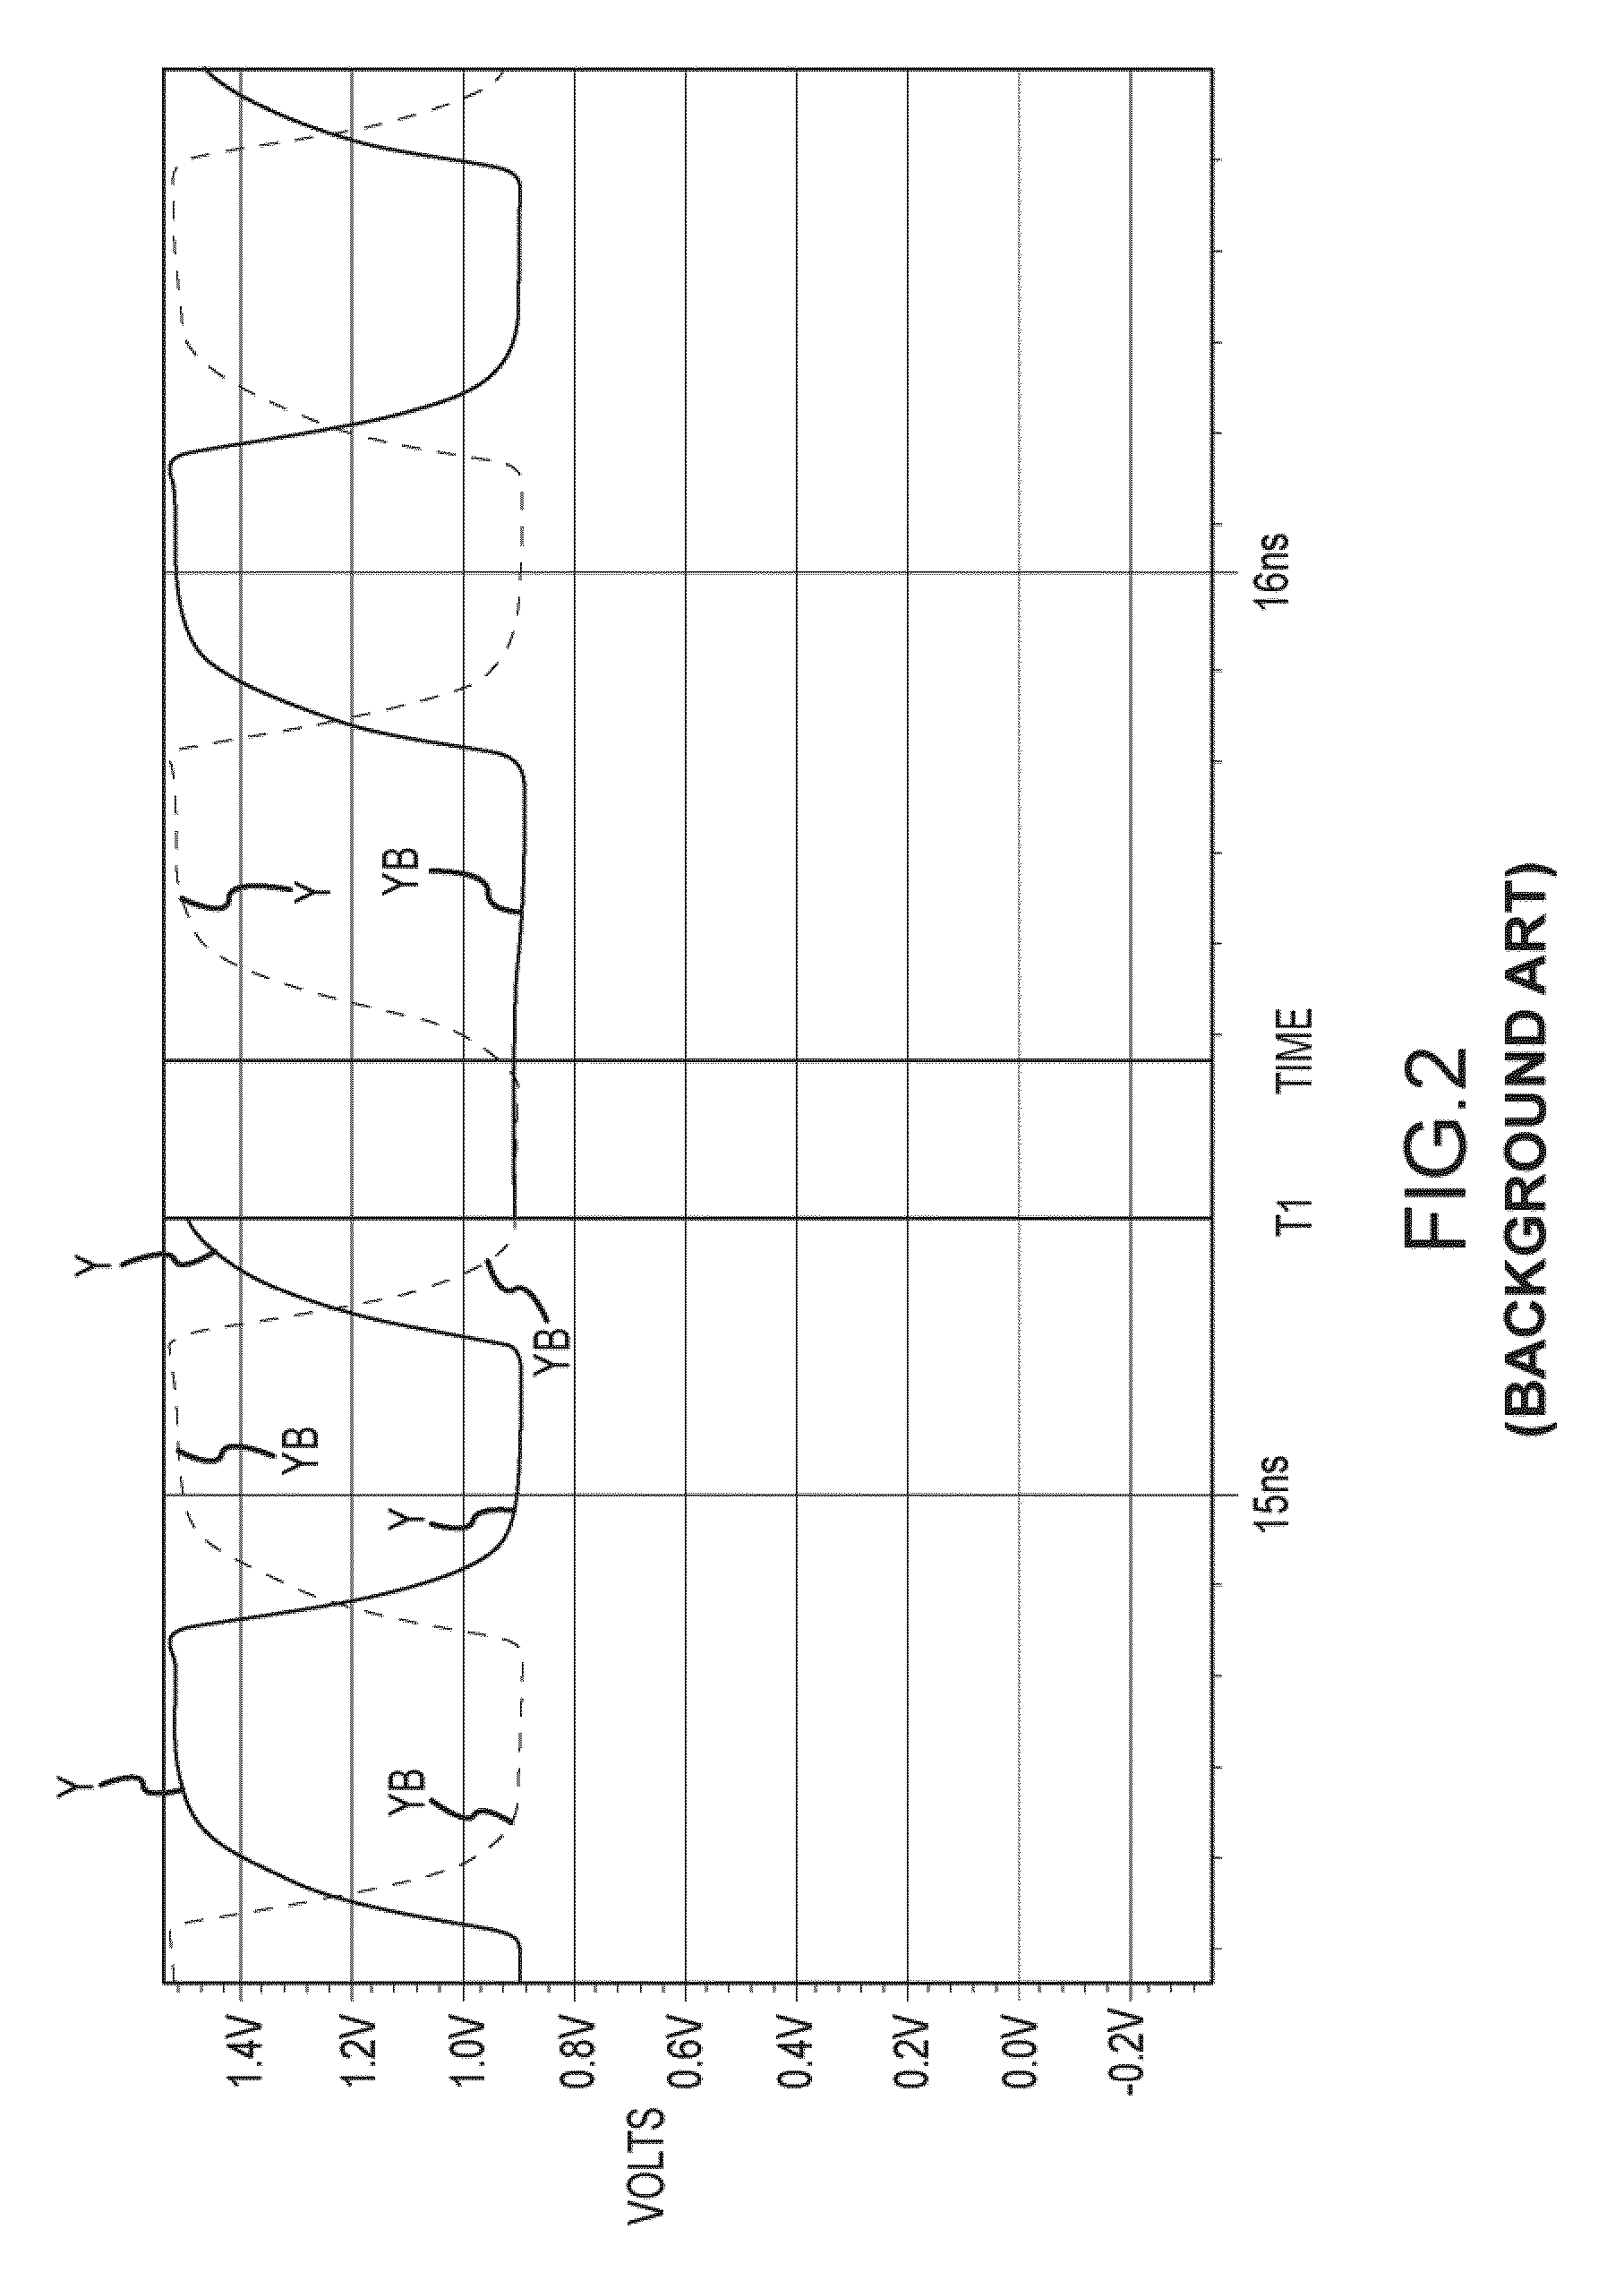 Hardened current mode logic (CML) voter circuit, system and method